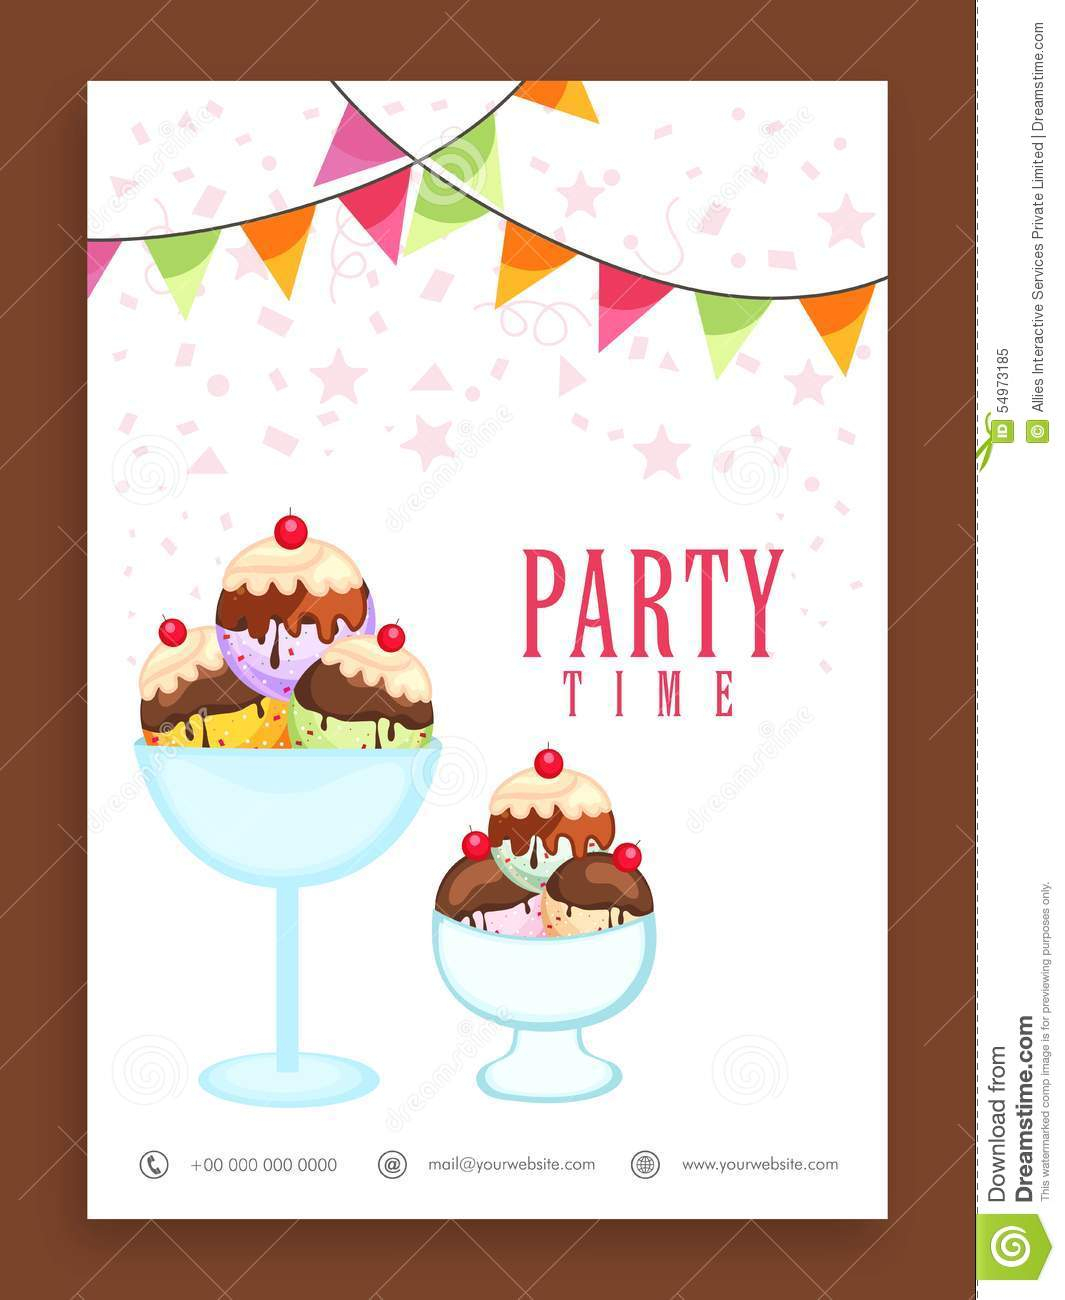 28 Images Of Ice Cream Party Flyers Template | Jackmonster With Regard To Ice Cream Social Flyer Template